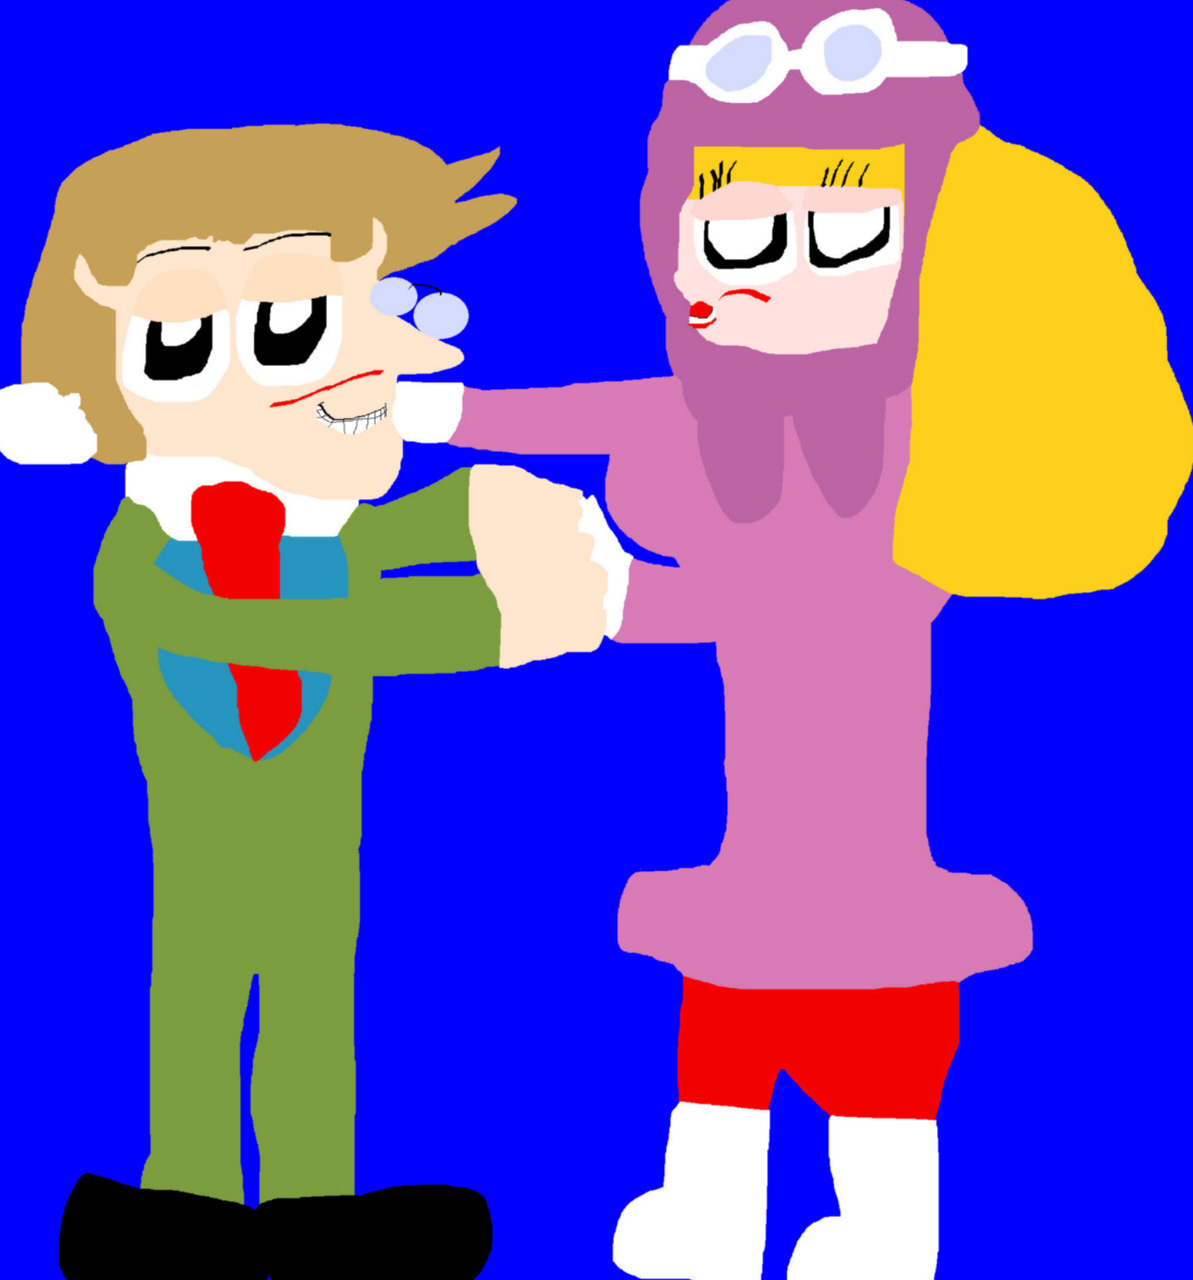 Sylvester Sneekly X Penelope Pitstop Holding Hands MS Paint^^ by Falconlobo